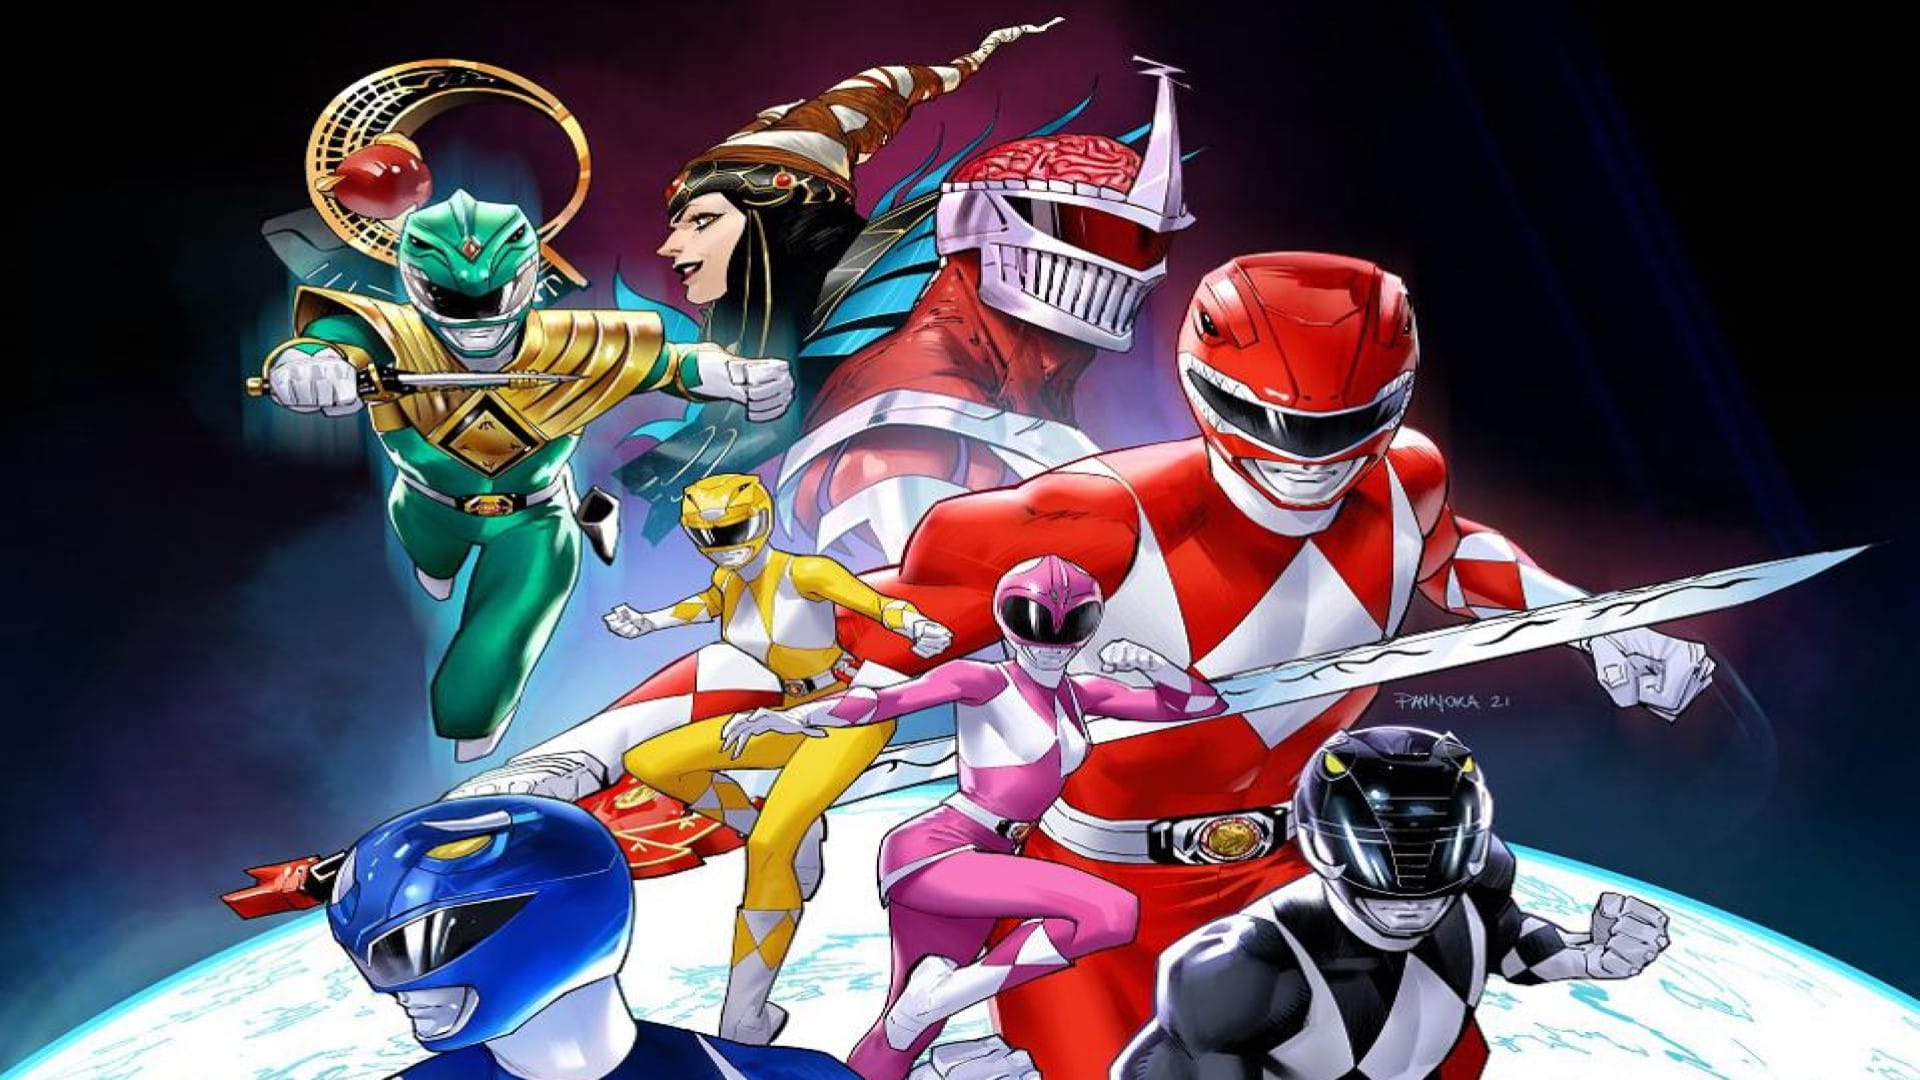 The team of Power Rangers with the villains in profile behind them